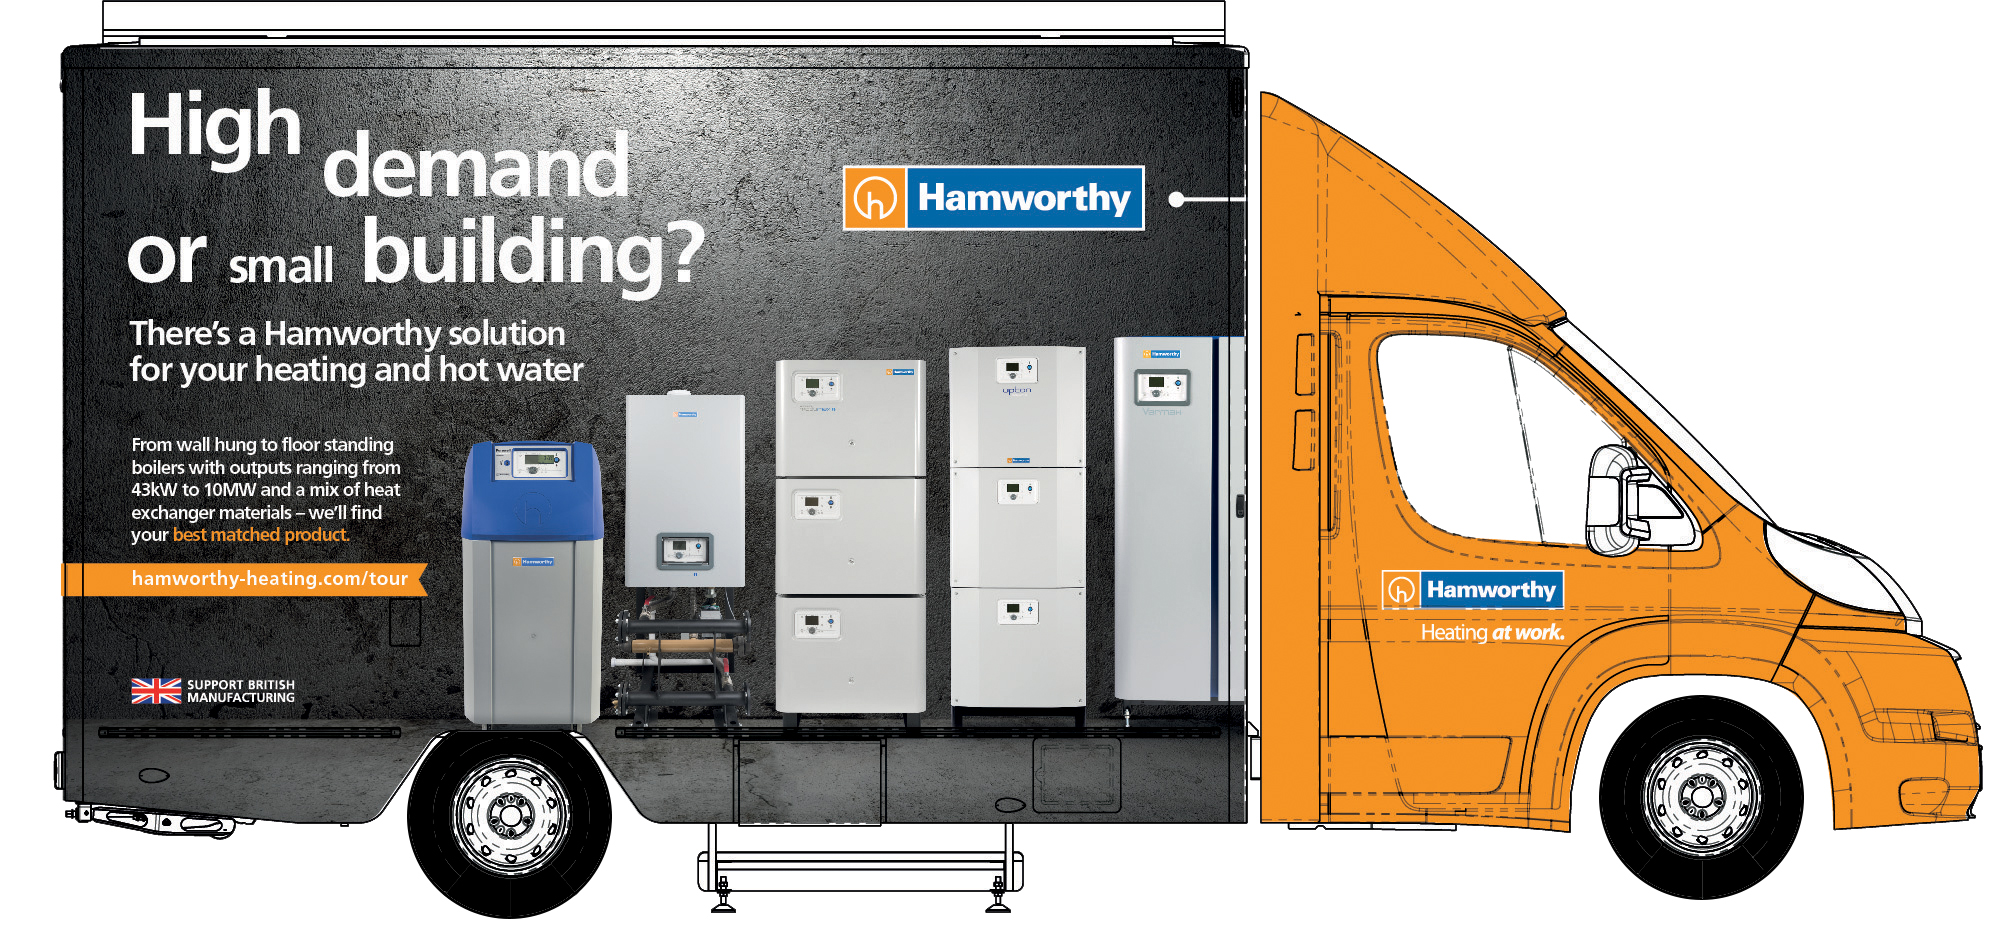 Hamworthy’s solutions for every building are on the road (again)